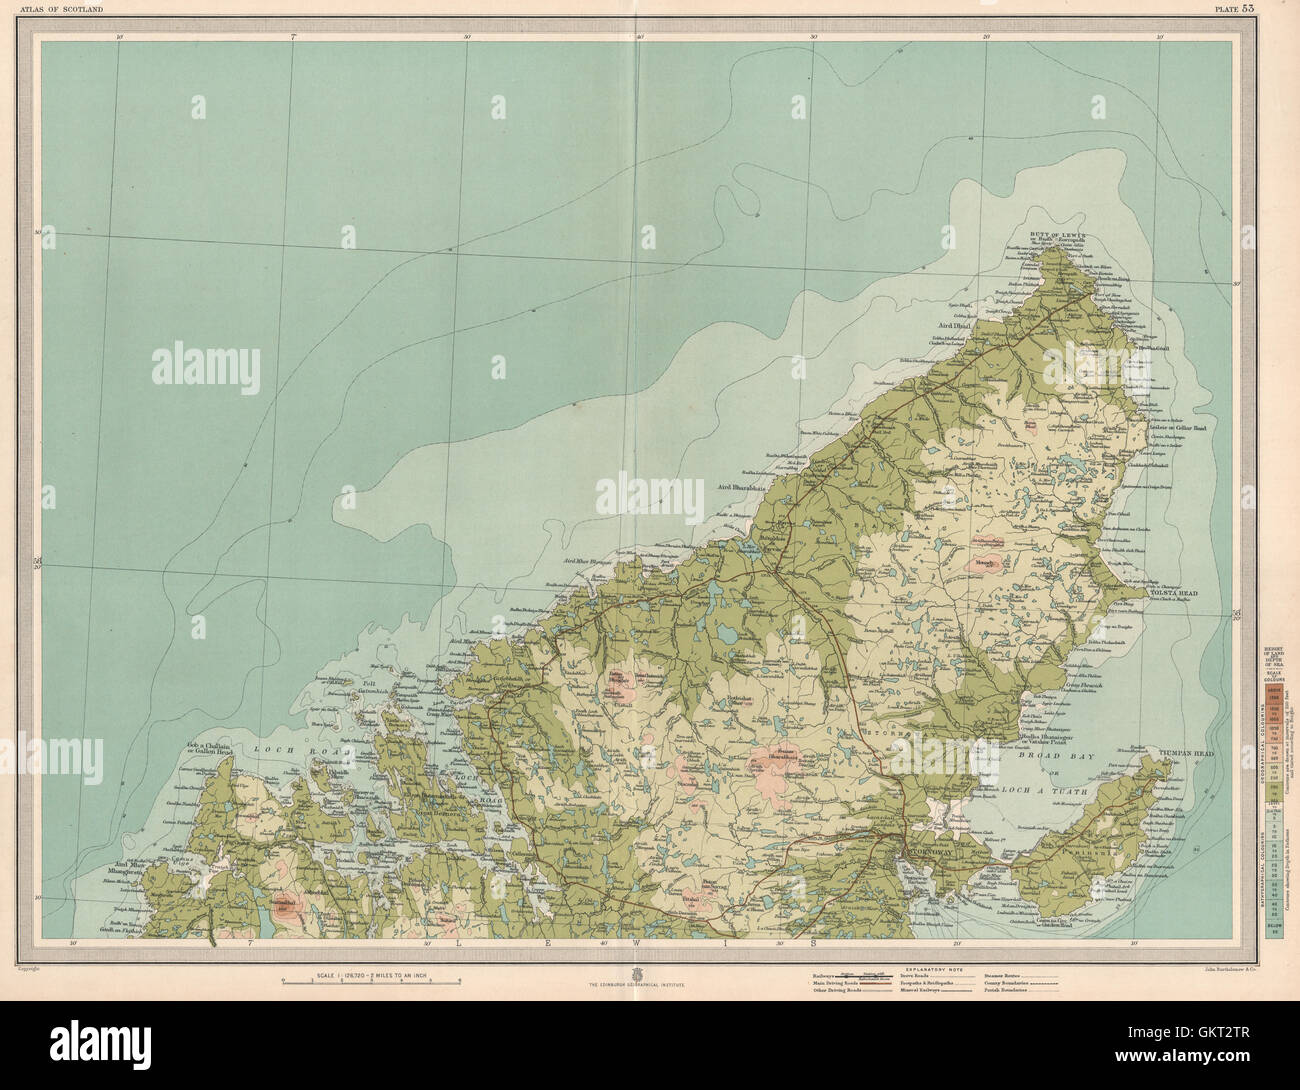 LEWIS Western Isles Outer Hebrides Stornoway. Scotland. LARGE, 1912 old map Stock Photo